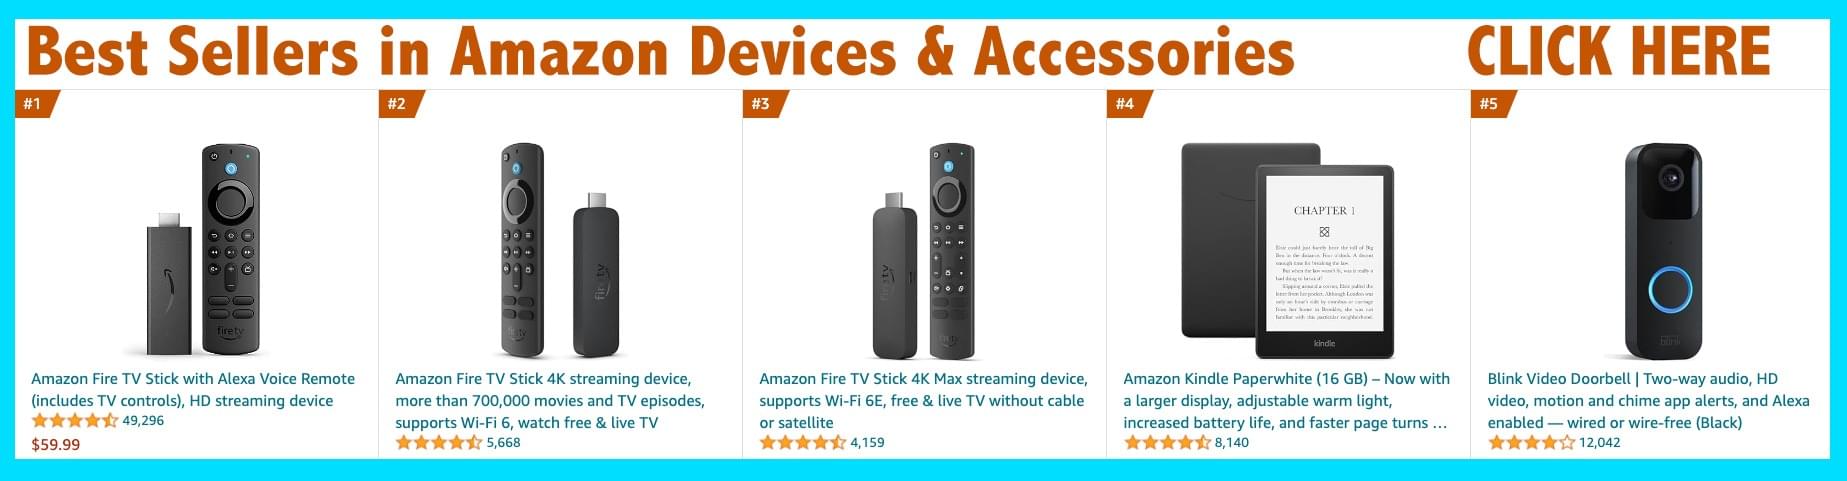 Amazon Best Sellers in Devices & Accesories